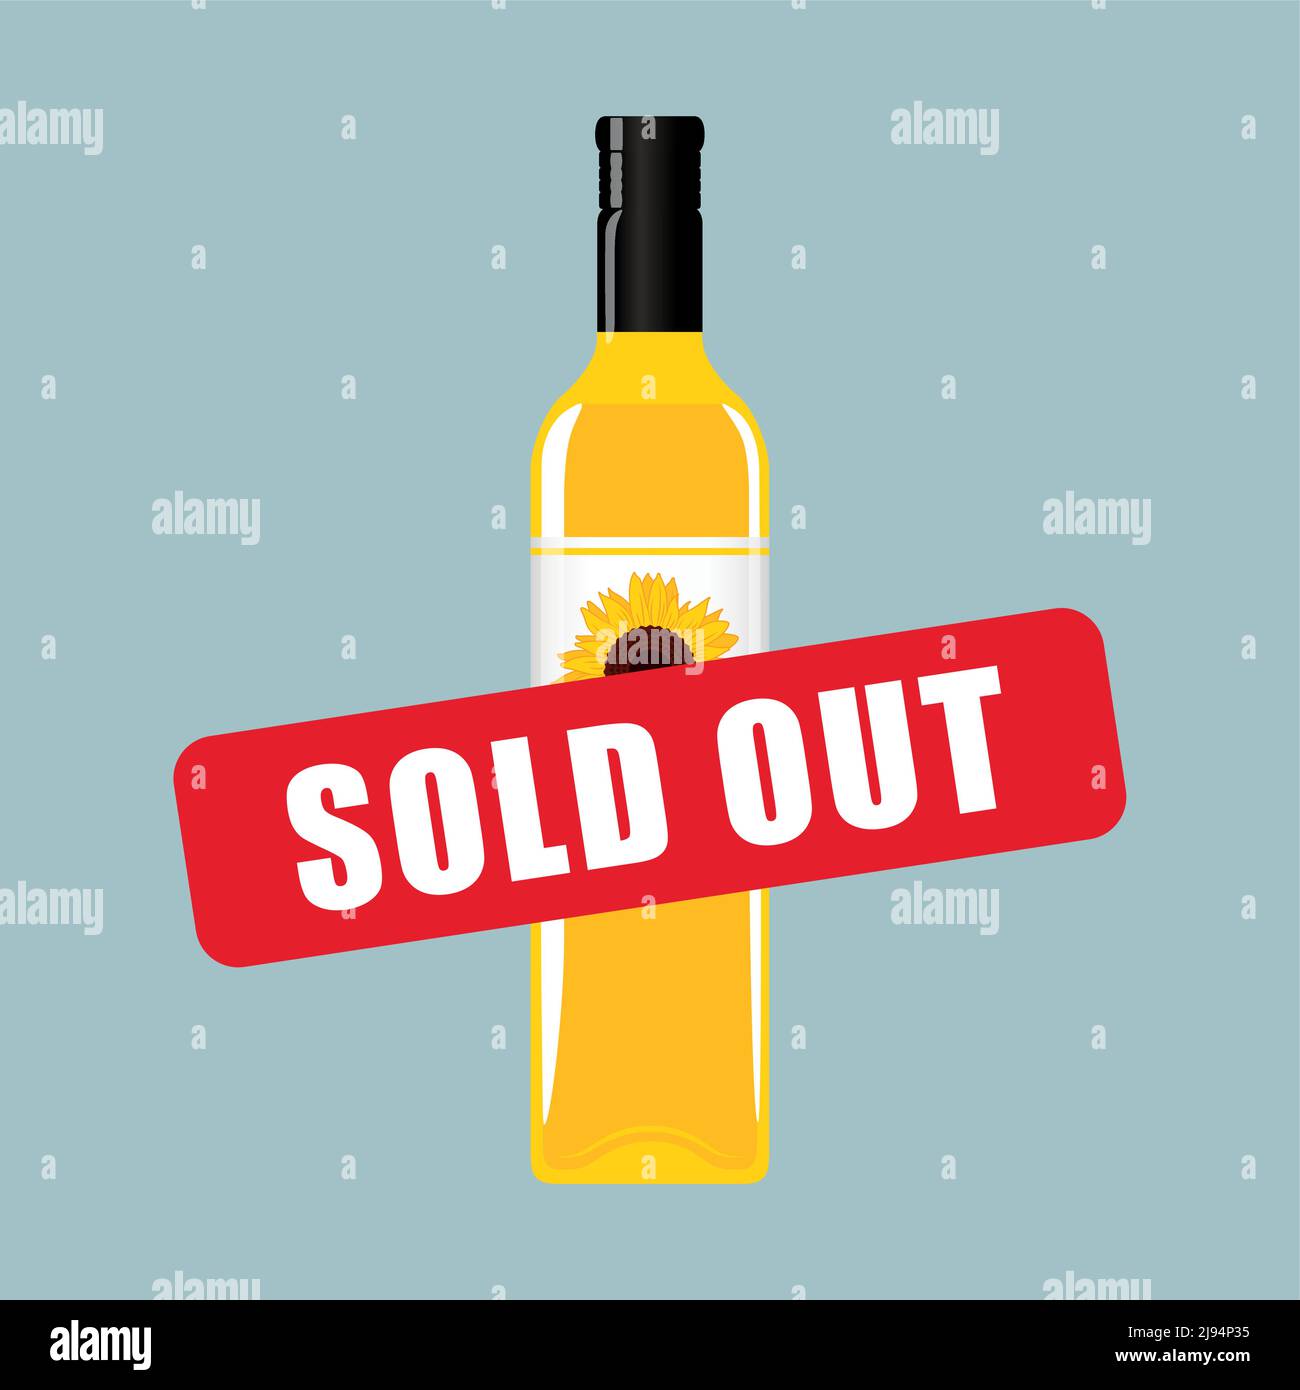 sunflower oil bottle sold out sign isolated Stock Vector